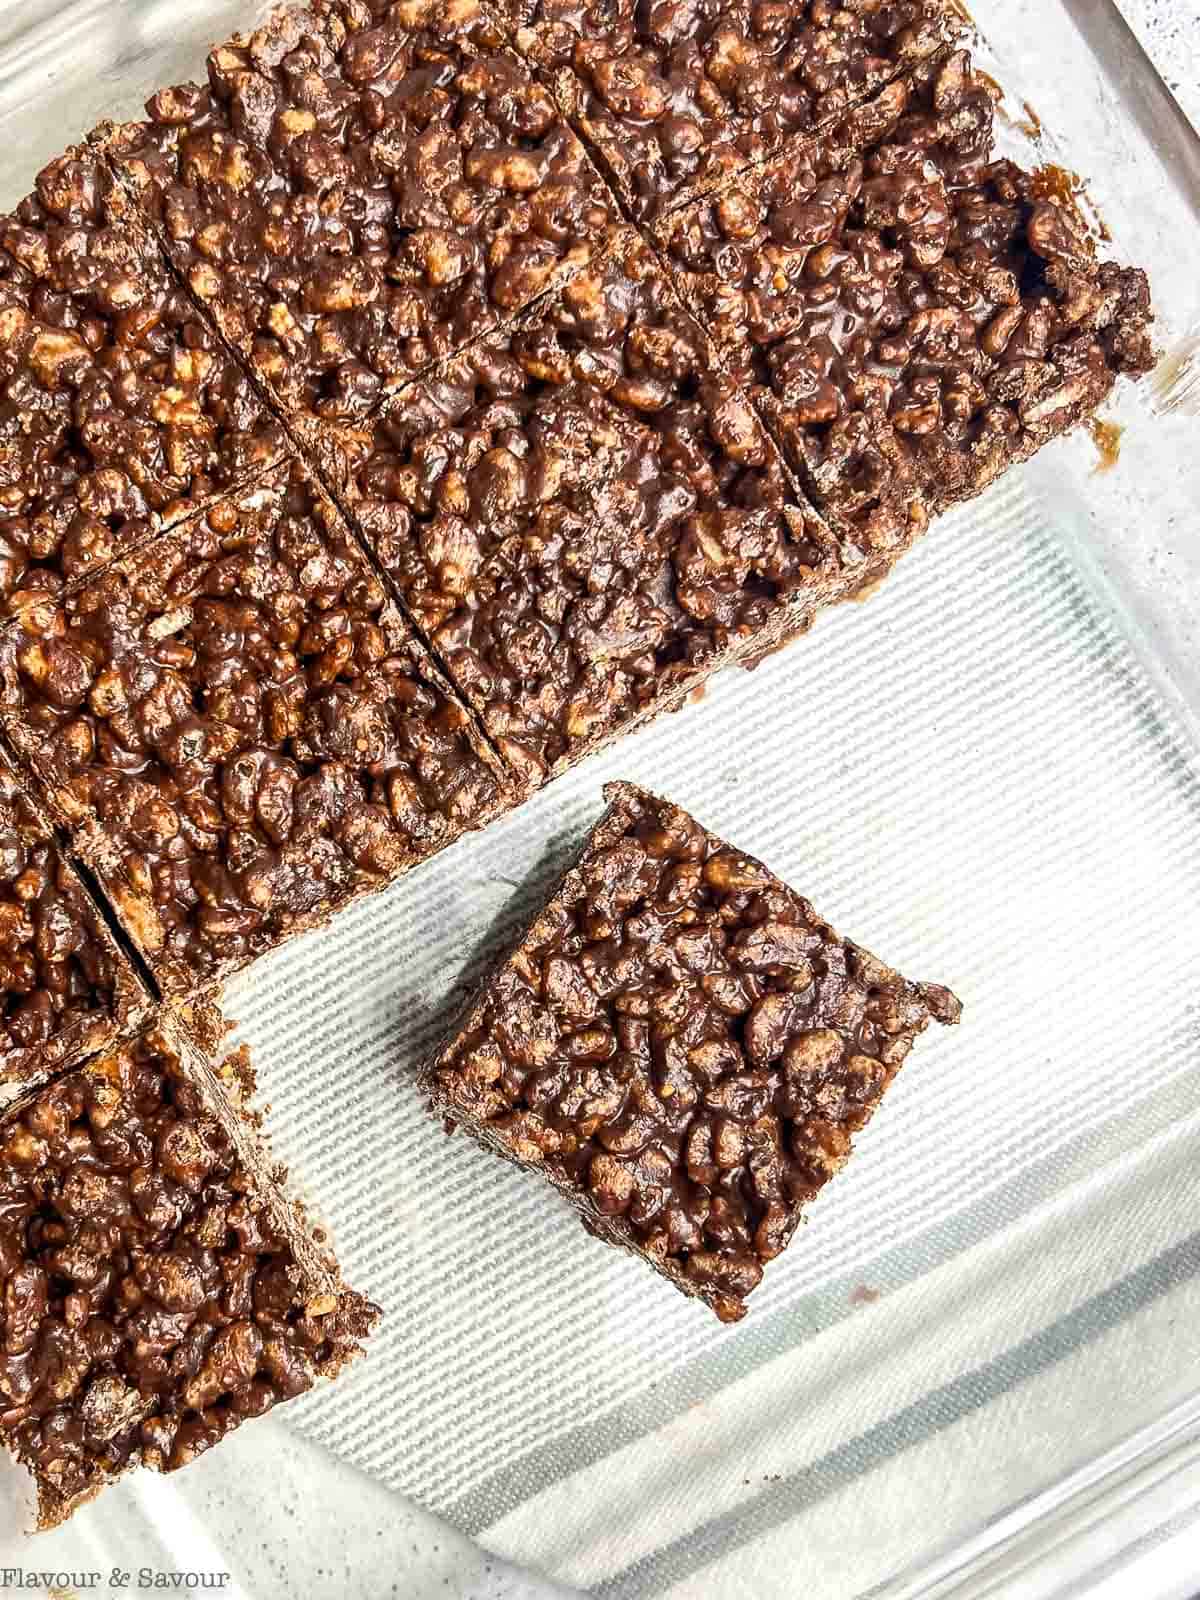 Chocolate peanut butter Rice Krispie squares in a baking pan.